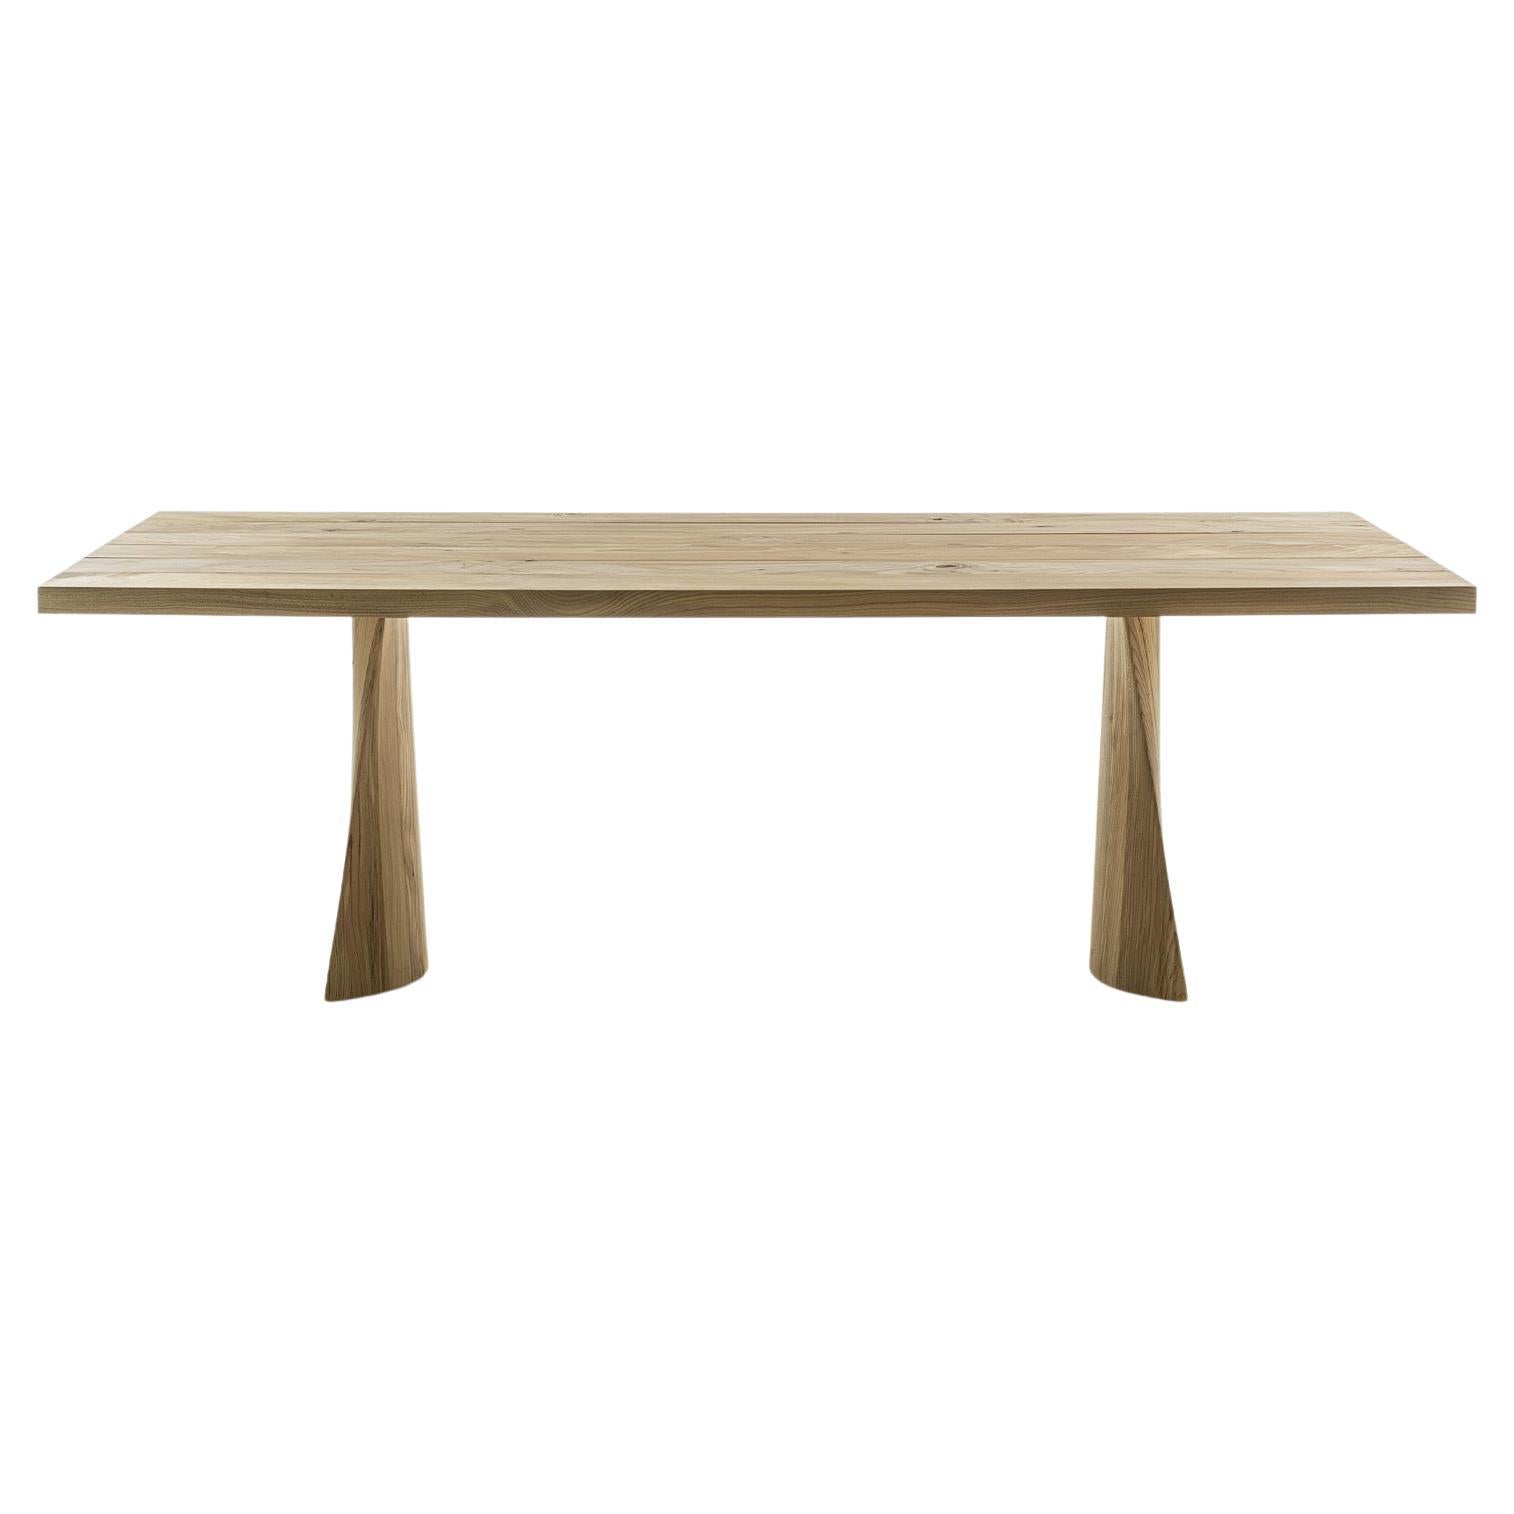 Simple Swing Cedar Outdoor Table, Designed by Studio Excalibur, Made in Italy For Sale